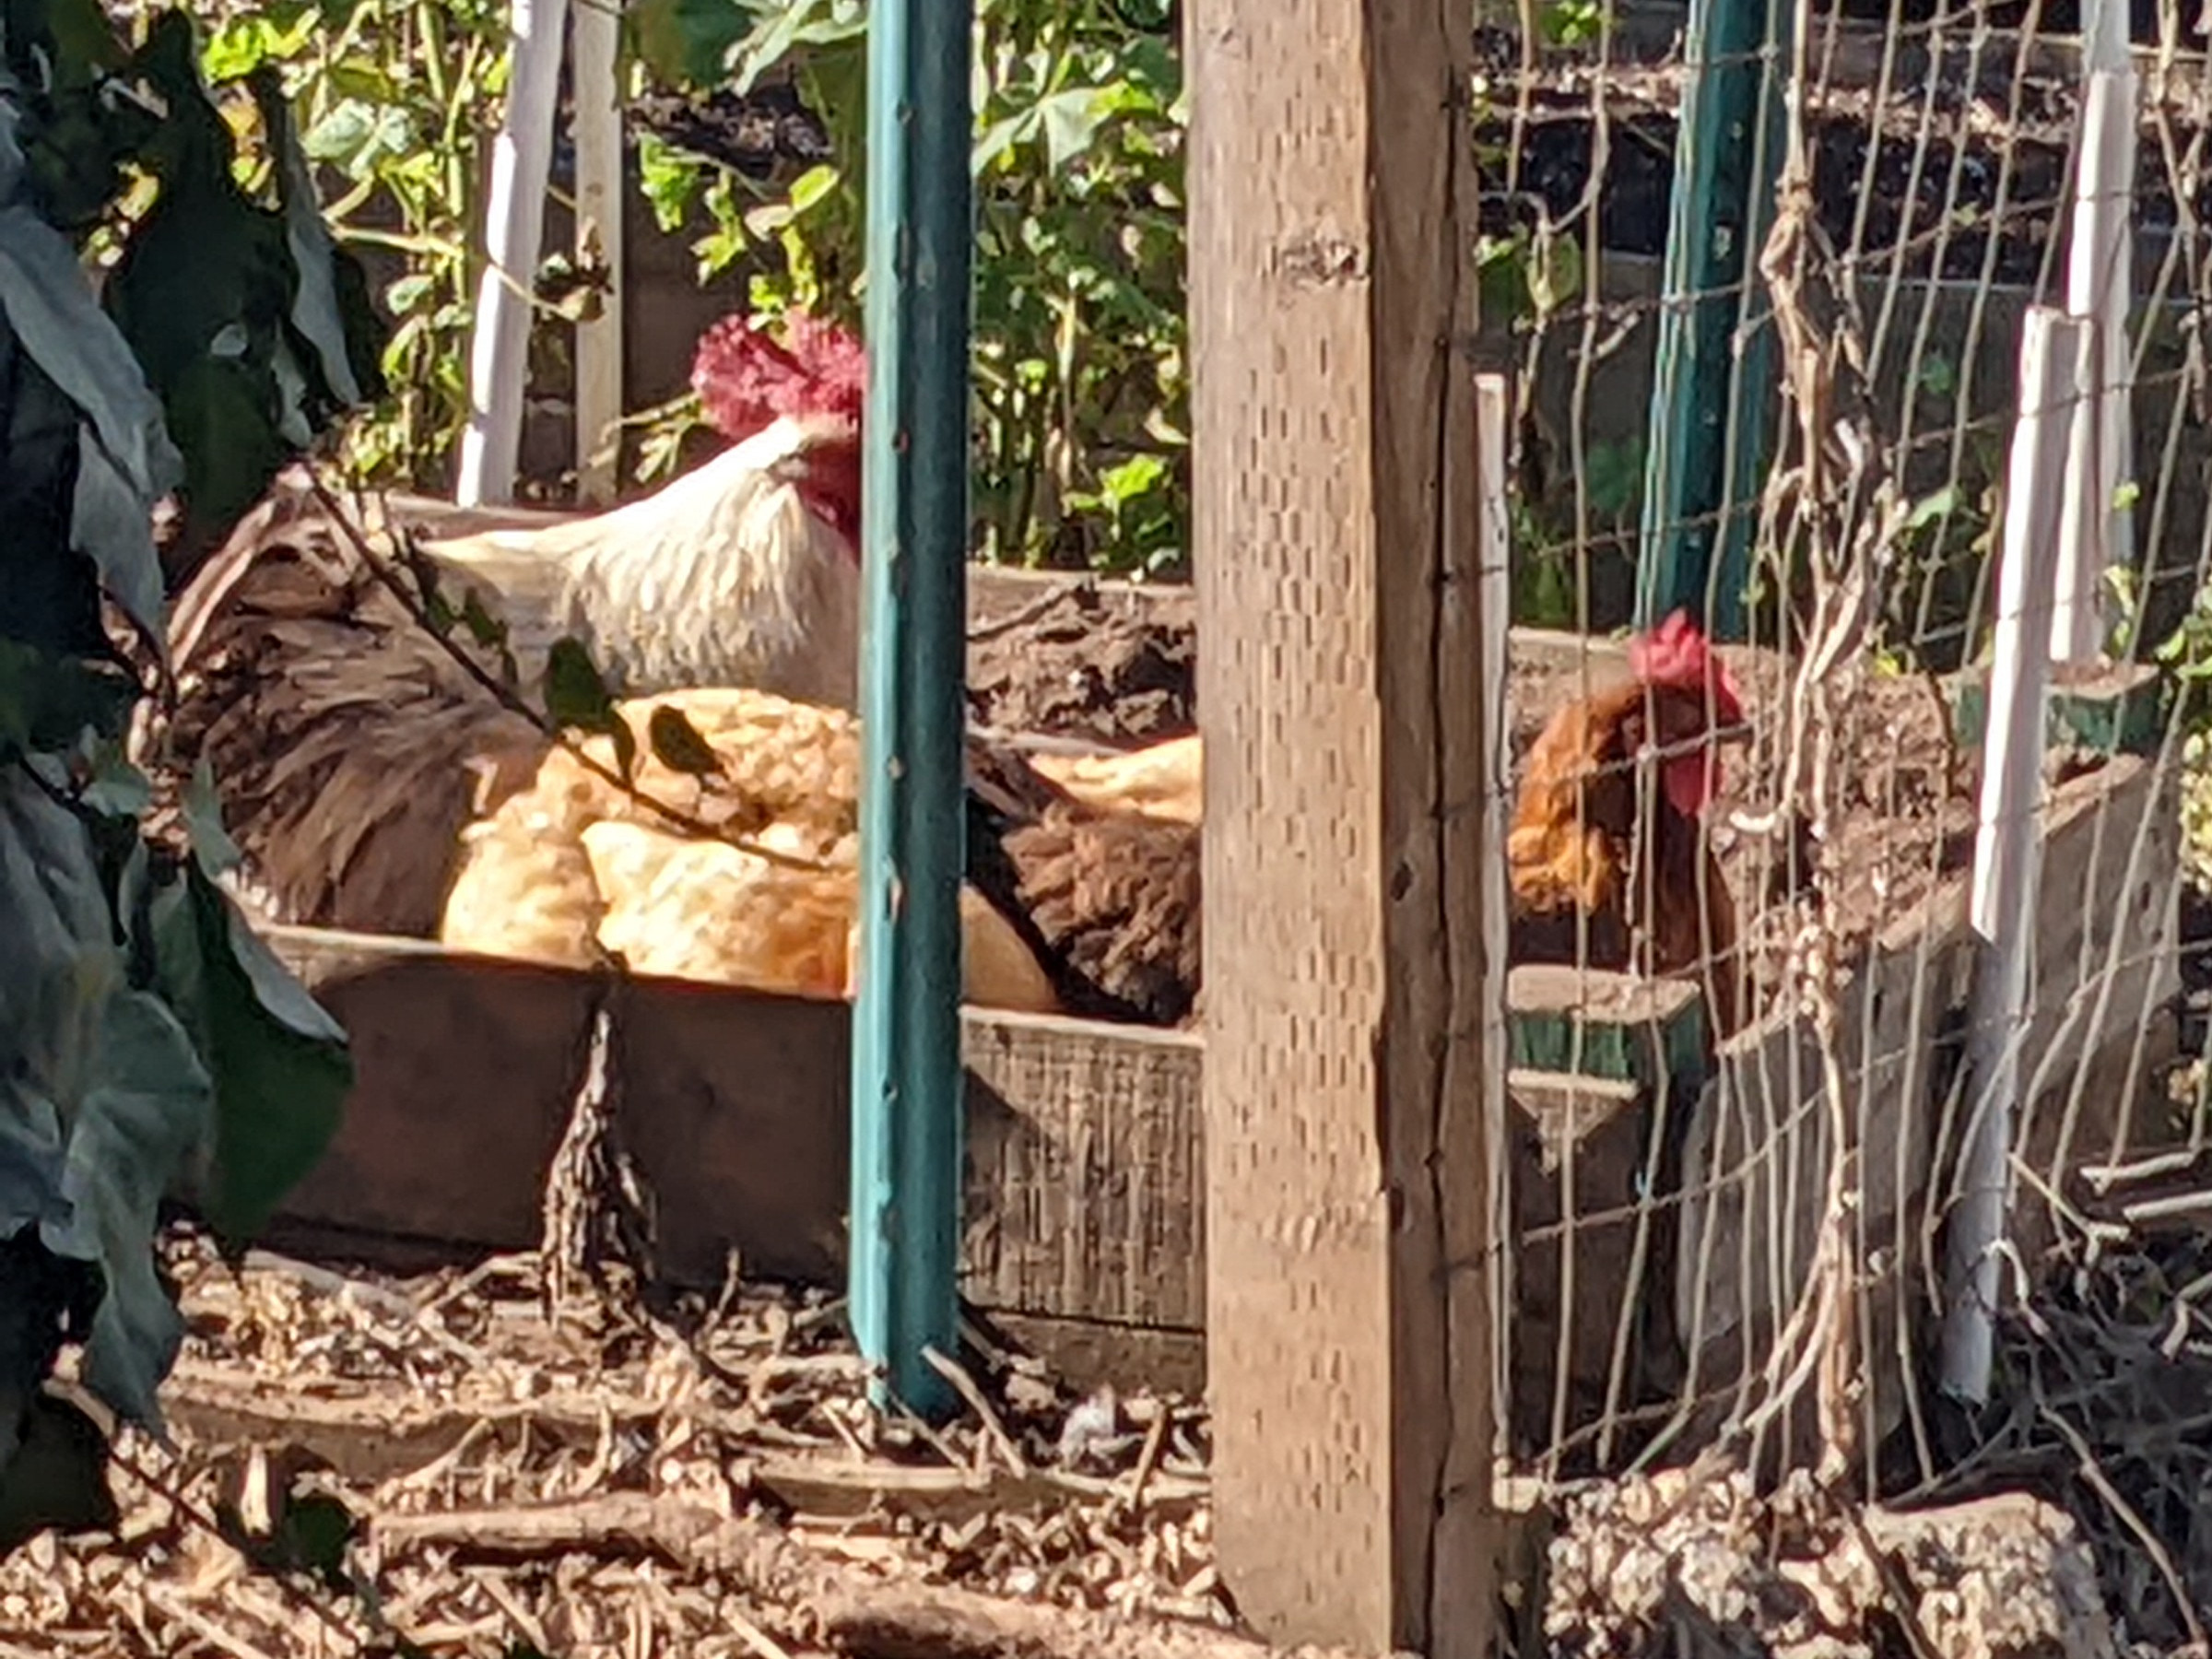 Free range chickens in a raised bed